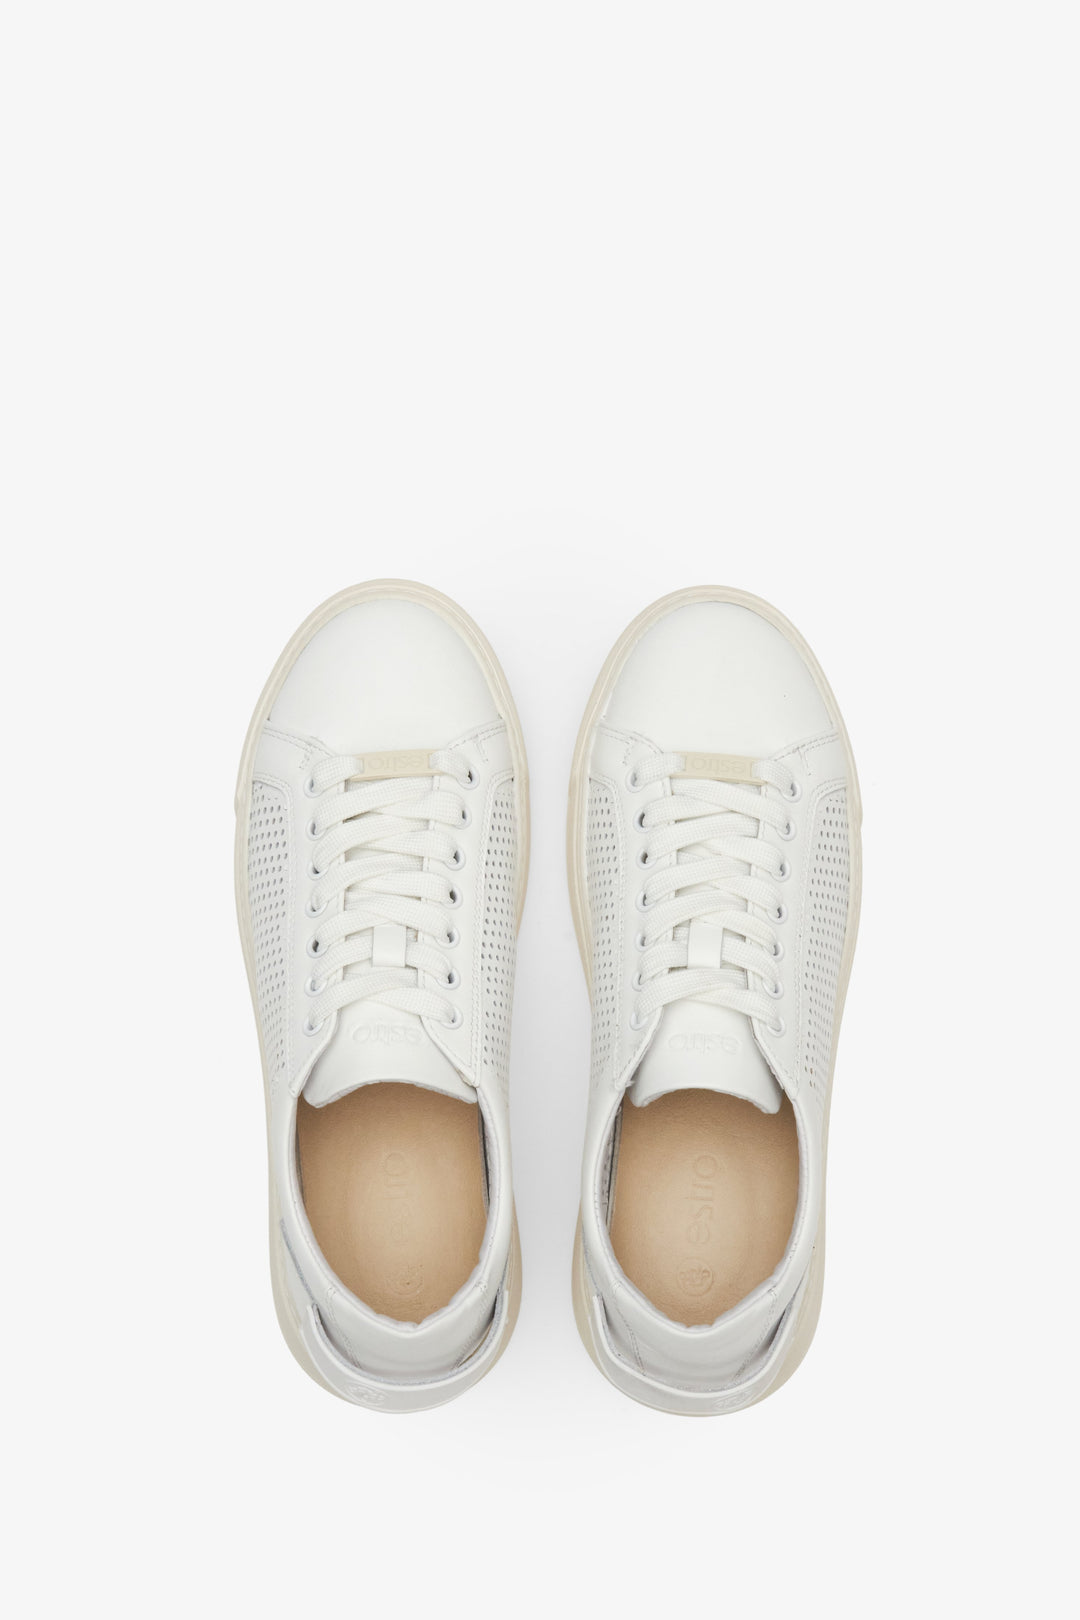 Women's white leather sneakers with perforation - presentation of the footwear from above.